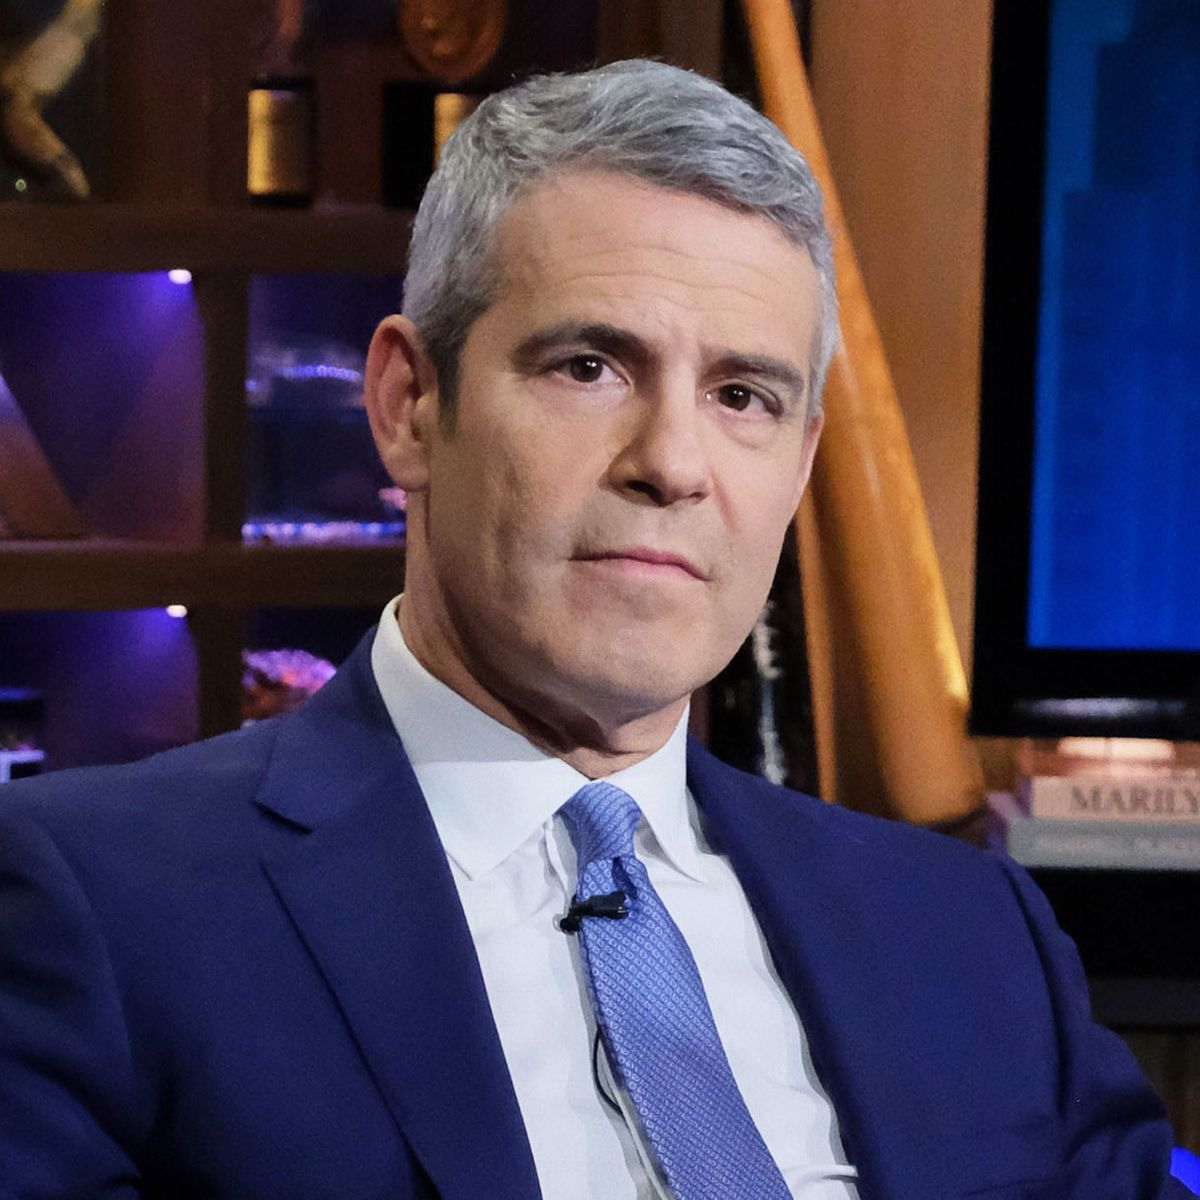 IS Andy Cohen losing it so much in beef that his net worth is now suffering? Here's all we know so far.